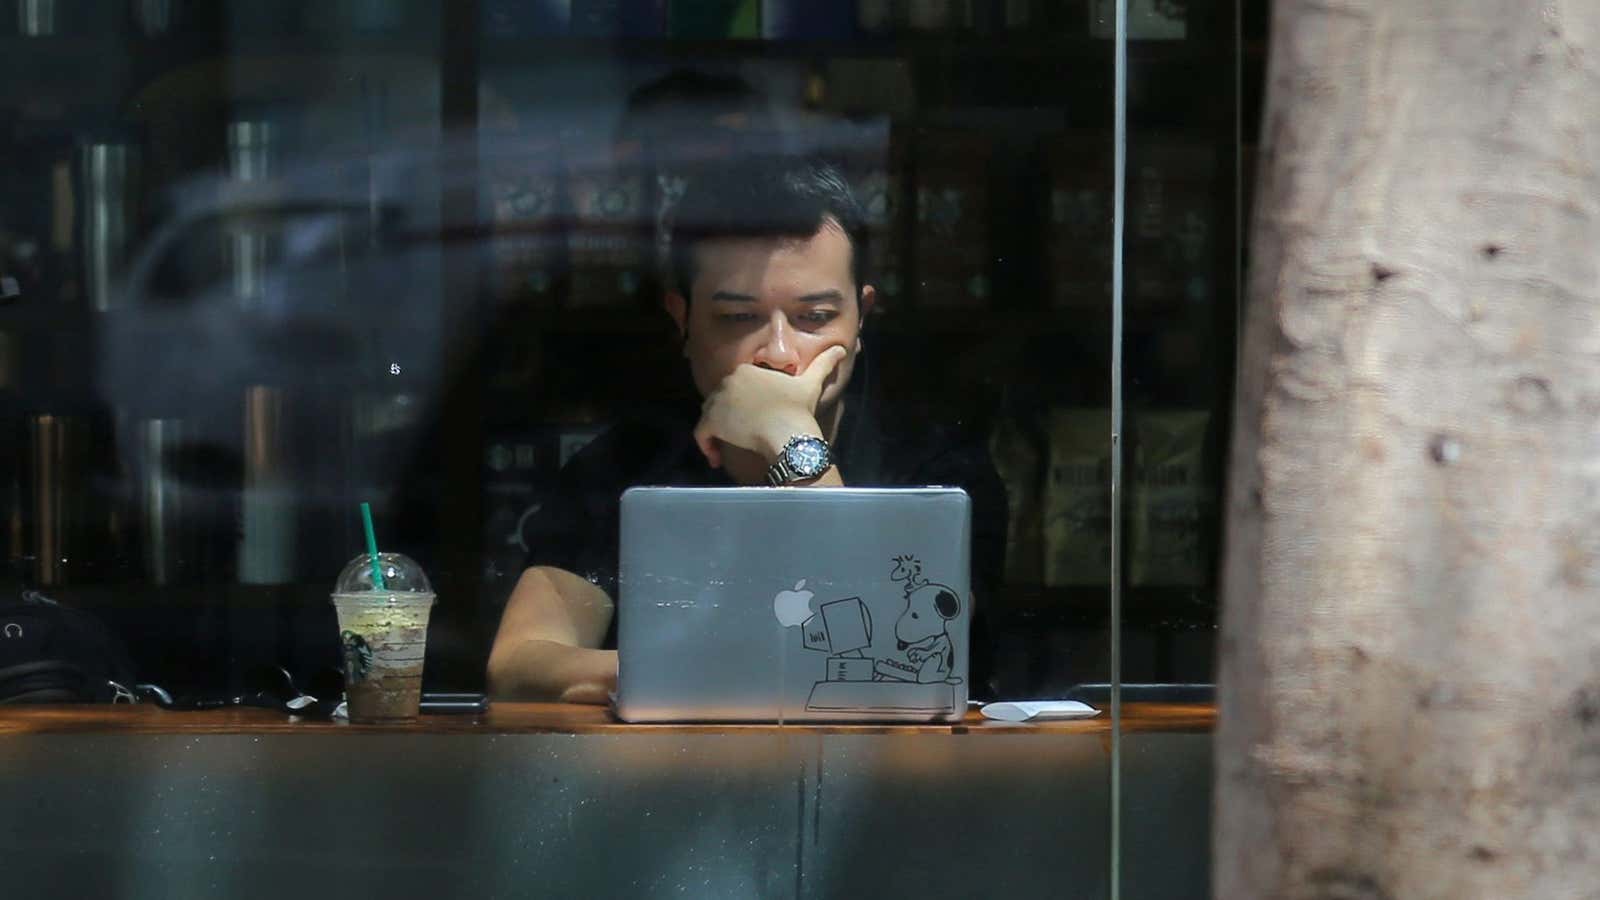 A pedestrian walks down the street while a man uses his laptop computer in a Starbucks cafe in central Sydney, Australia, October 18, 2017. REUTERS/Steven…